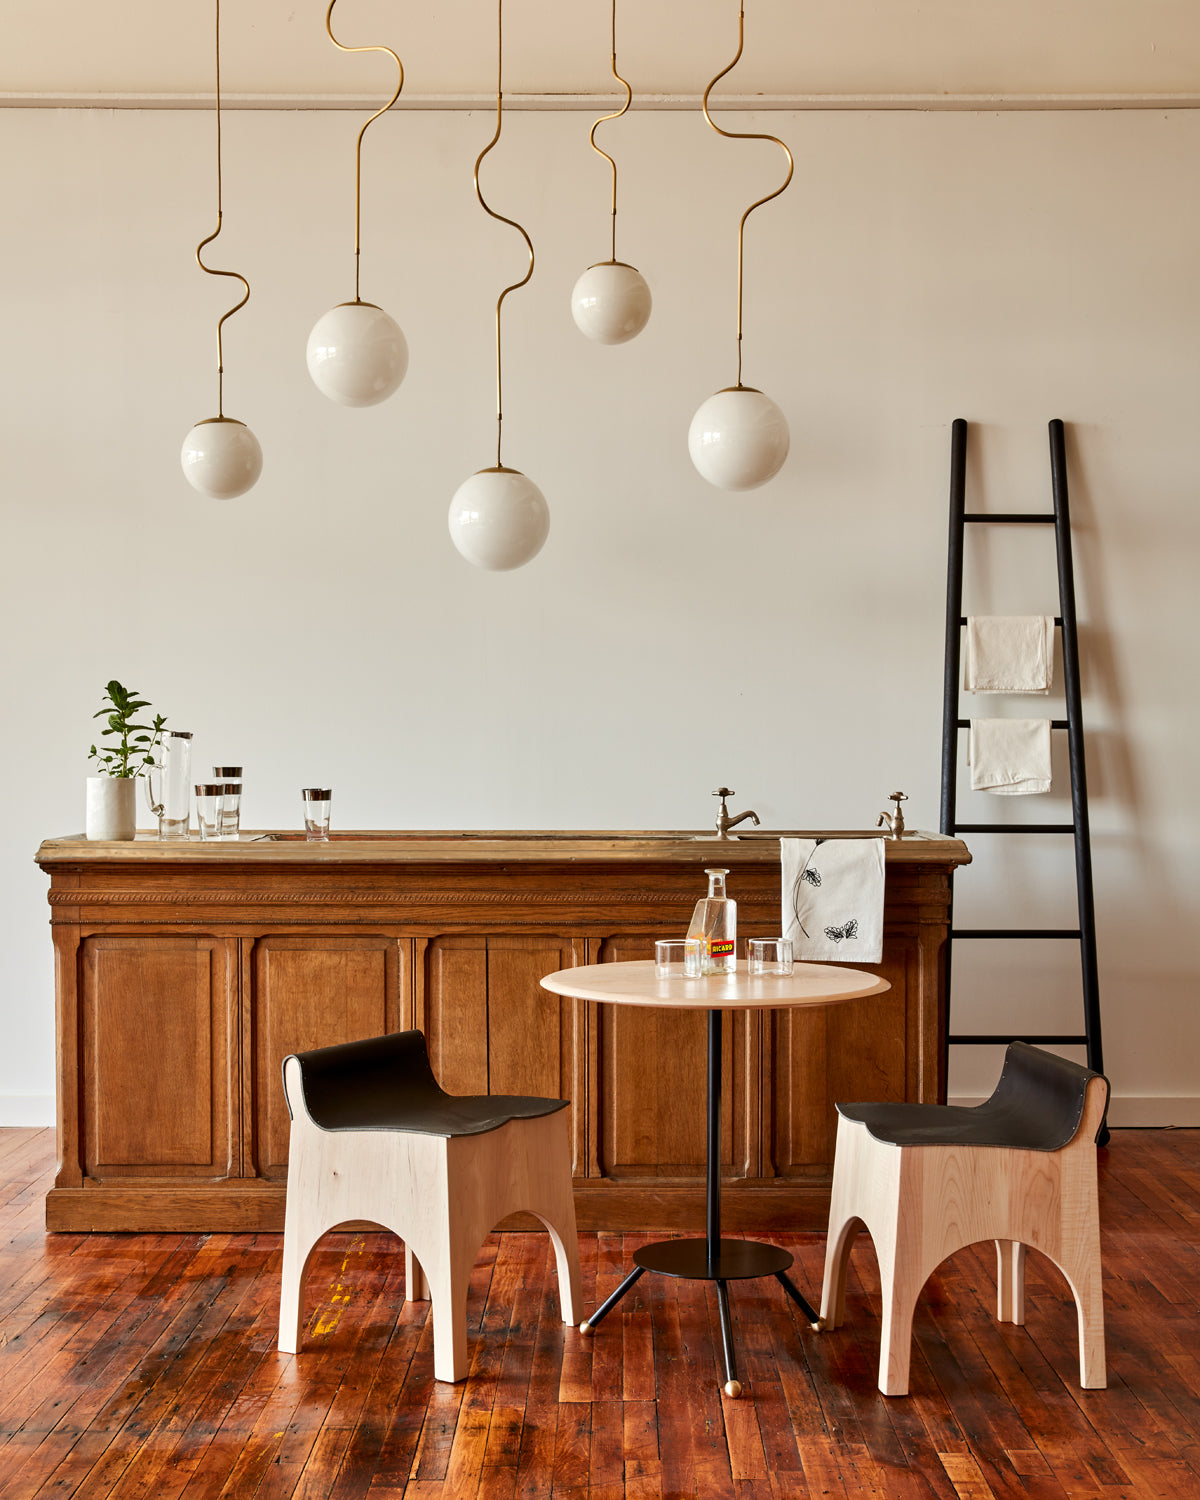 Modern brass globe pendant light with warm satin brass curved body and white milk glass globe over bar counter